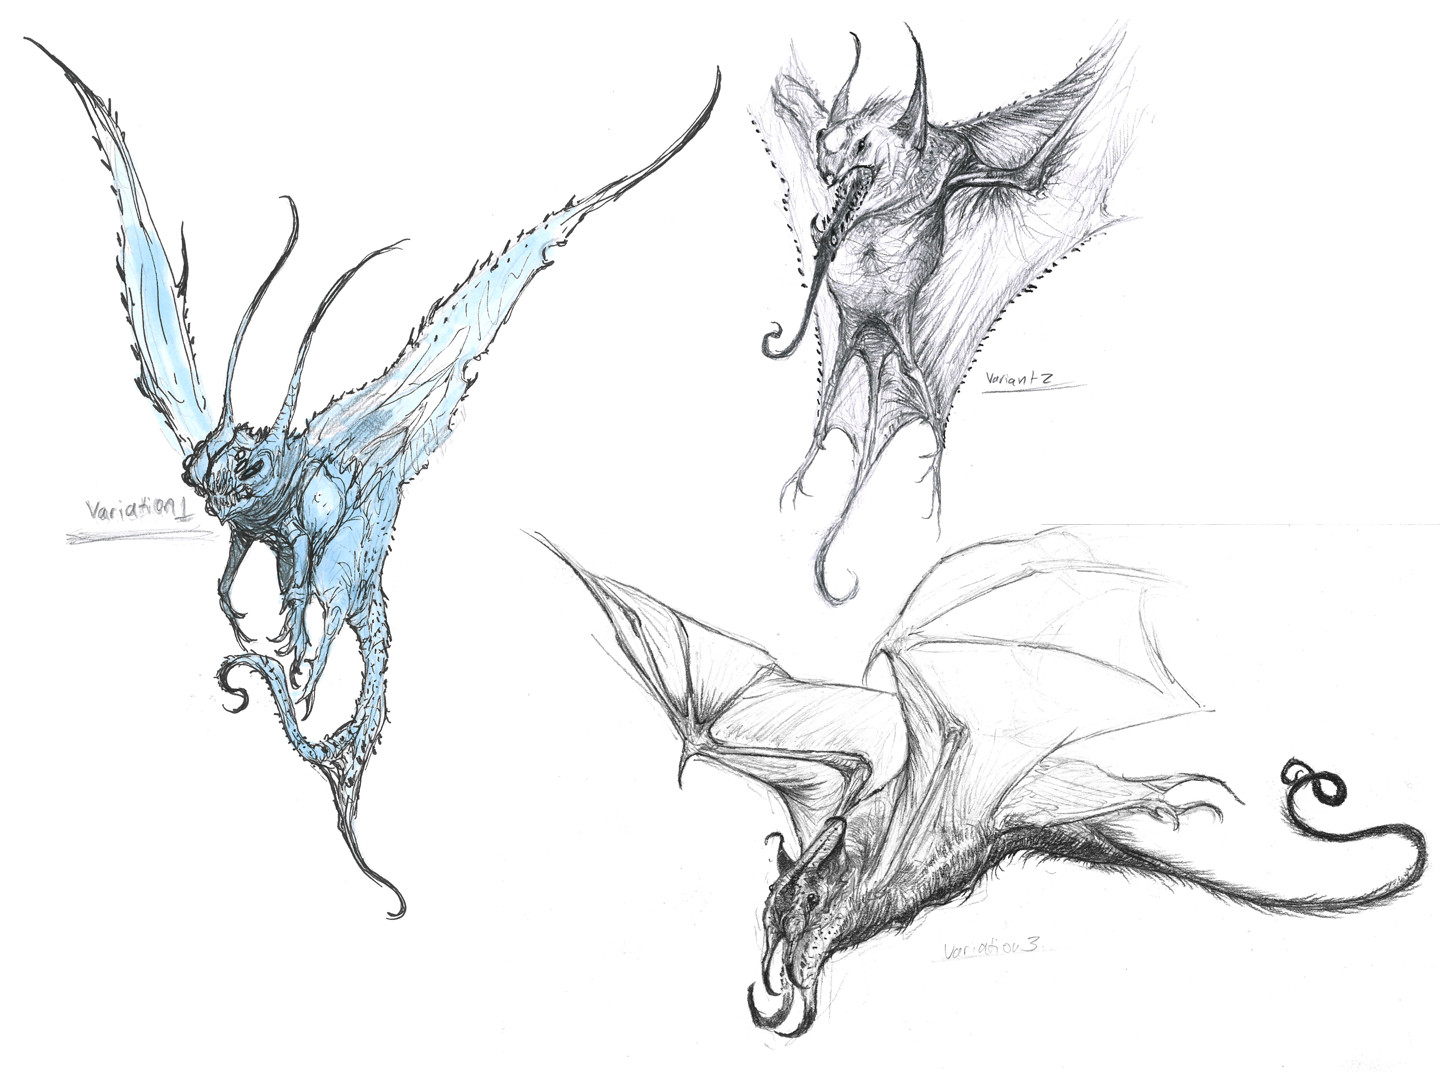 15660 Mythical Creatures Drawing Images Stock Photos  Vectors   Shutterstock